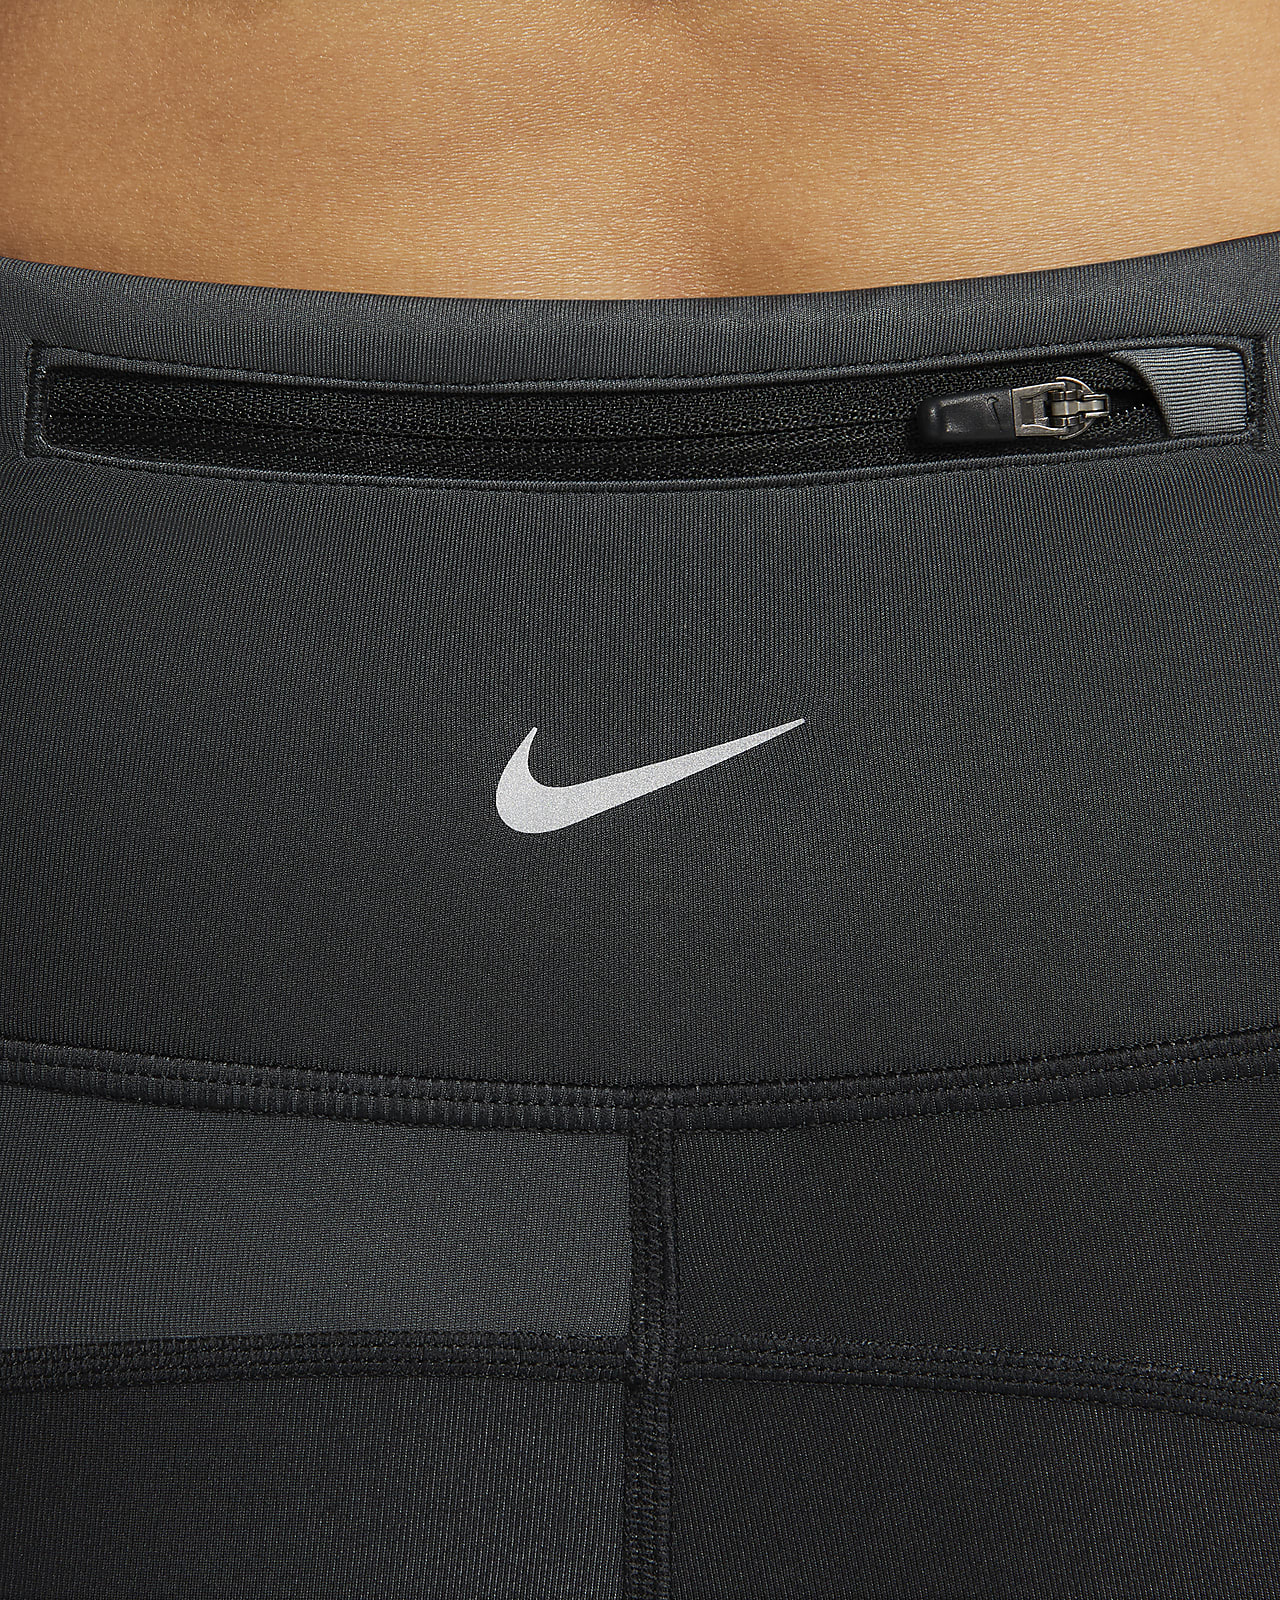 Nike Womens Mid-Rise 7/8 Running Leggings with Pockets